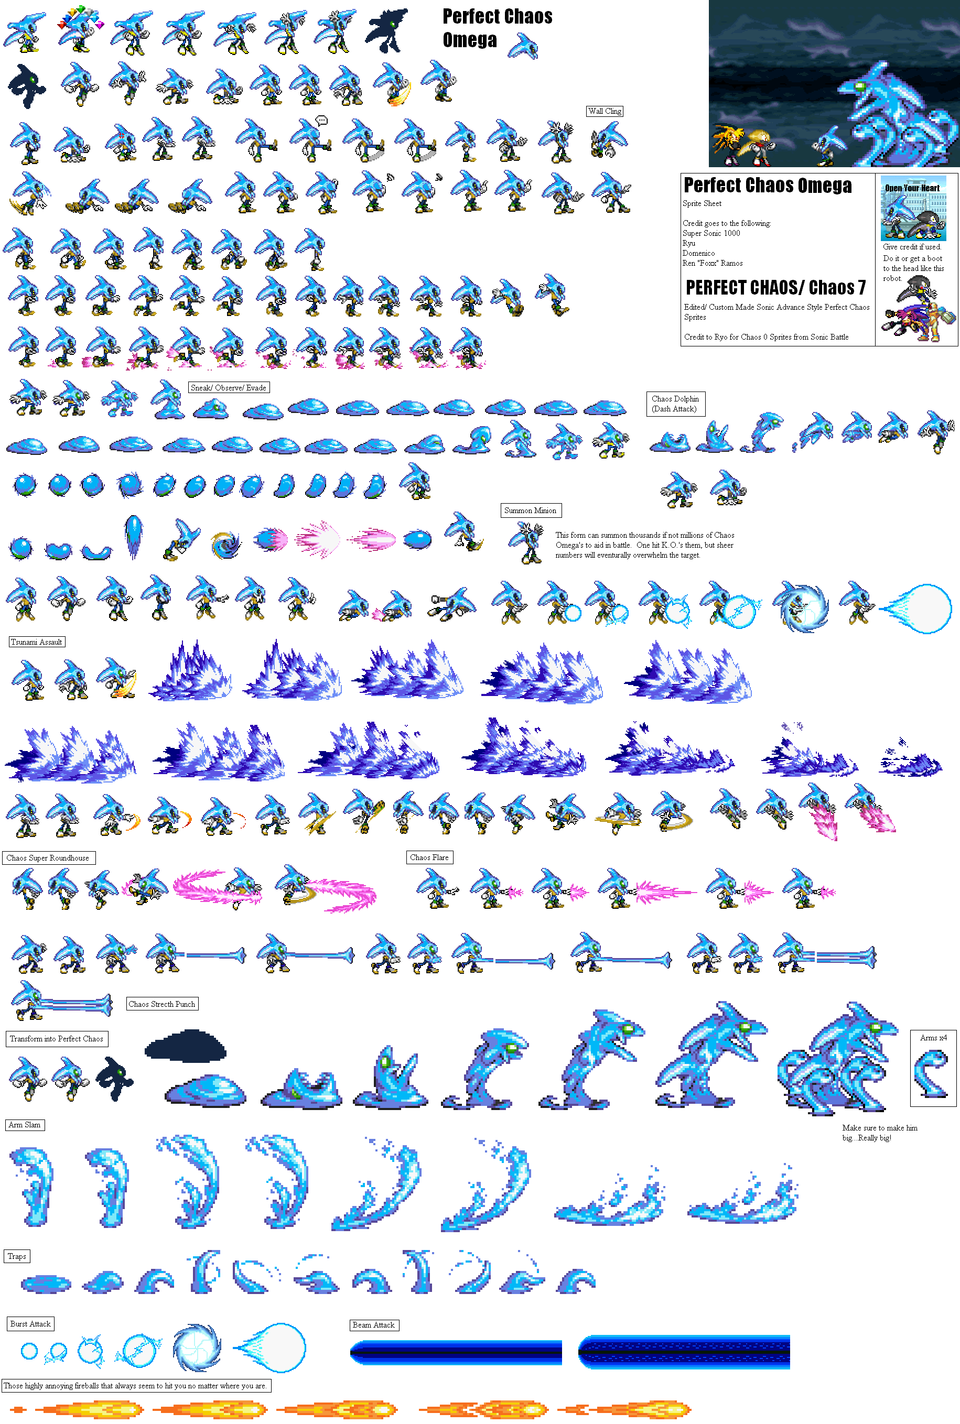 Perfect Chaos Omega/ Perfect Chaos Sprite Sheet